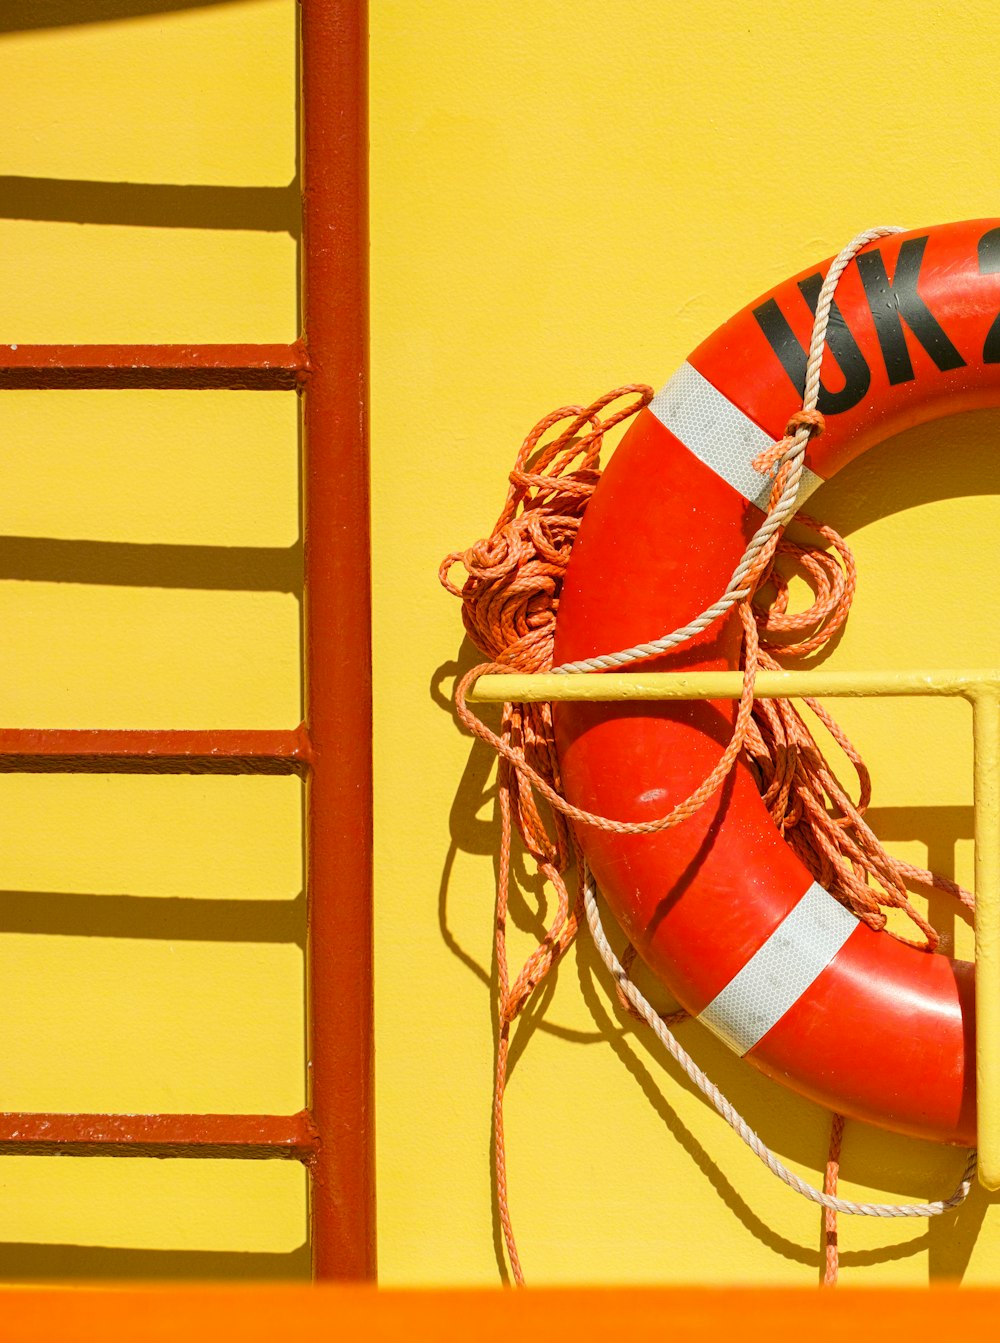 a life preserver hanging on a yellow wall